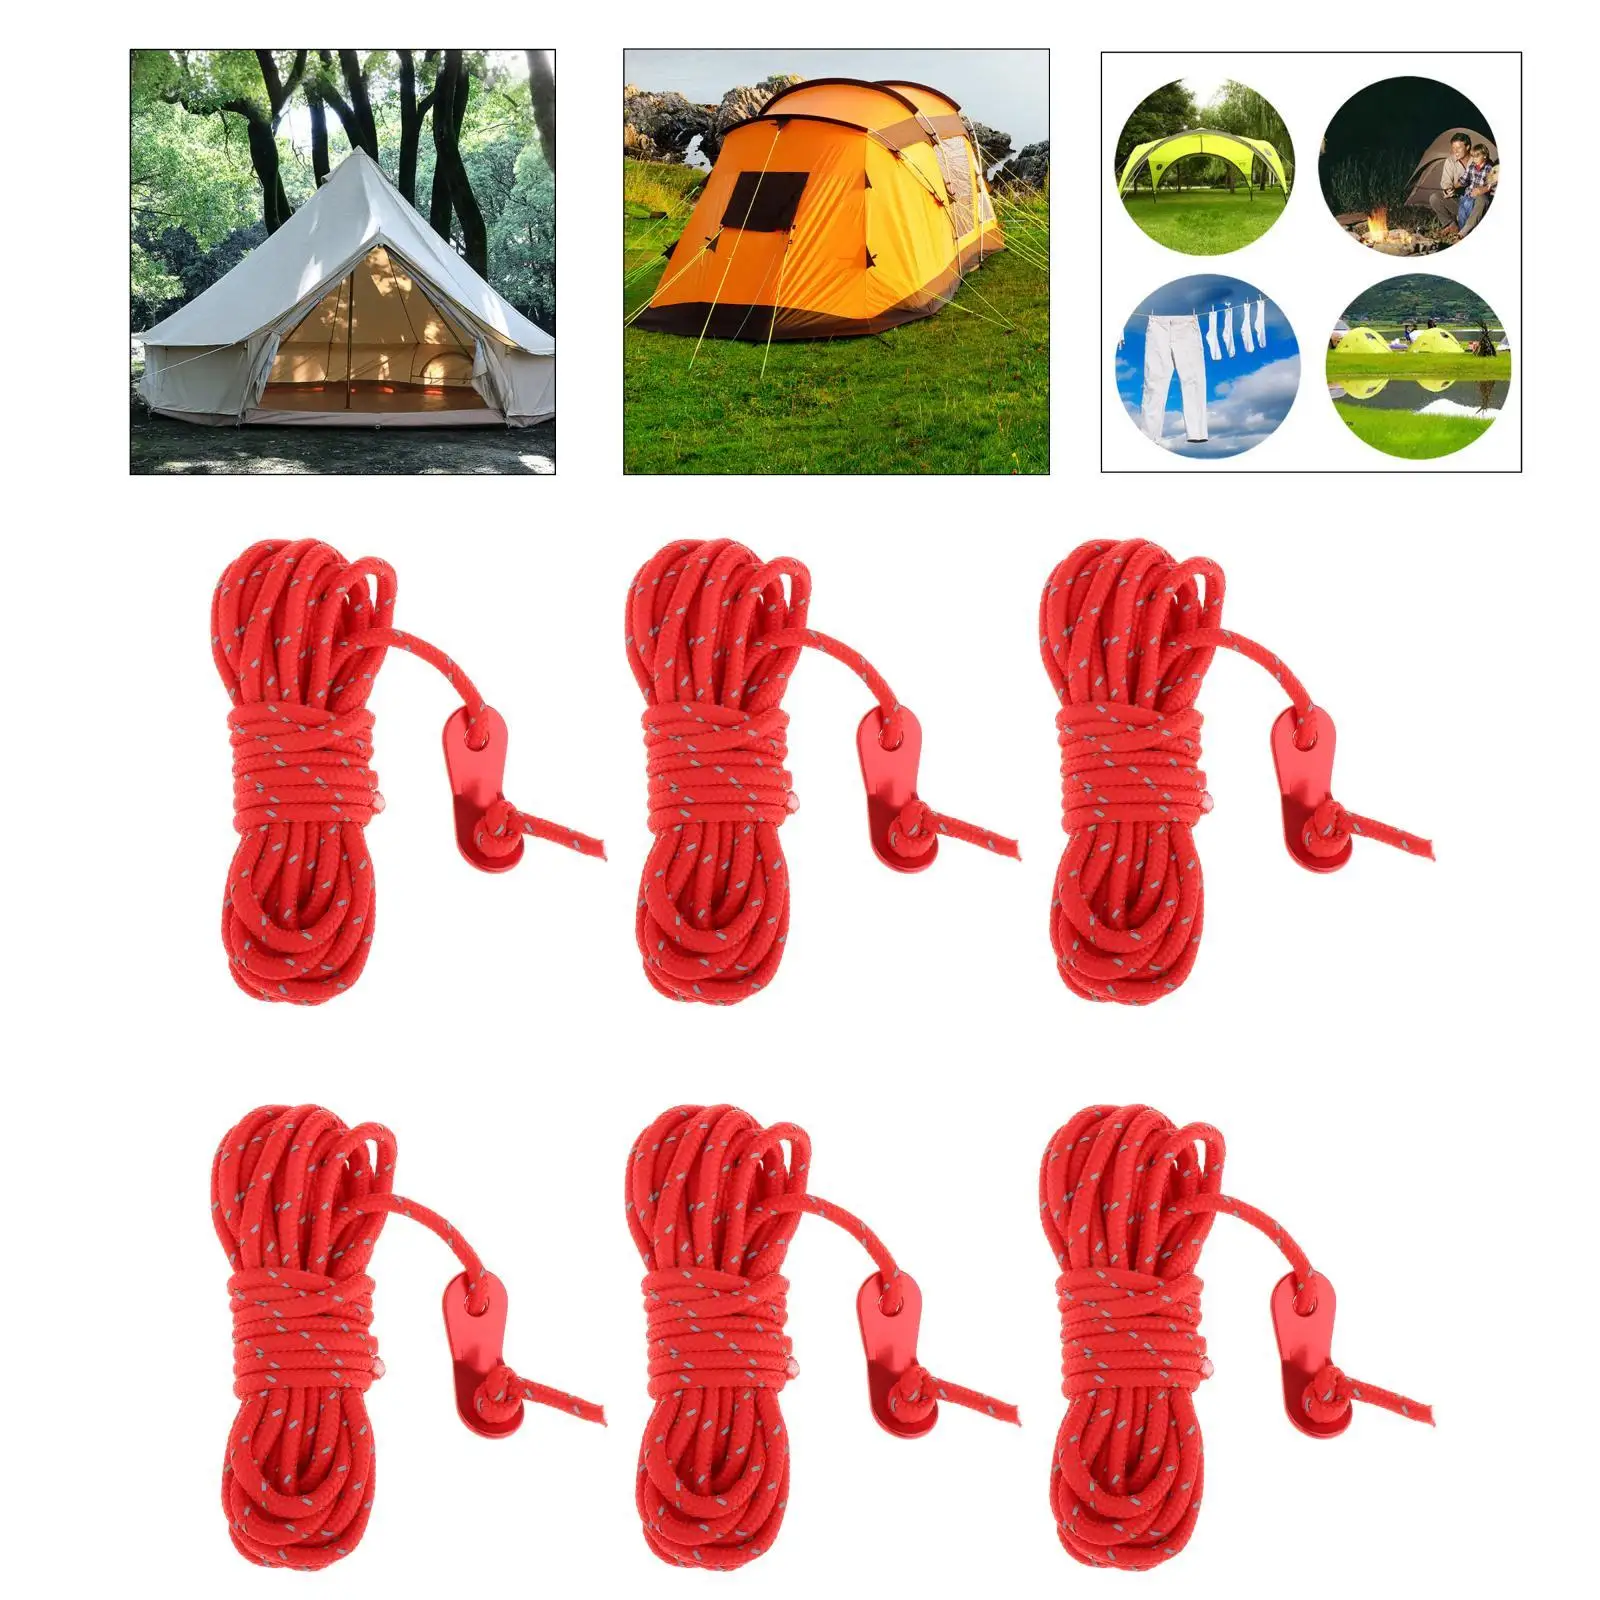 4mm Credits Tent Rope Reflective with 2- Clamp,  Light Tent String for Camping Hiking Backpack 